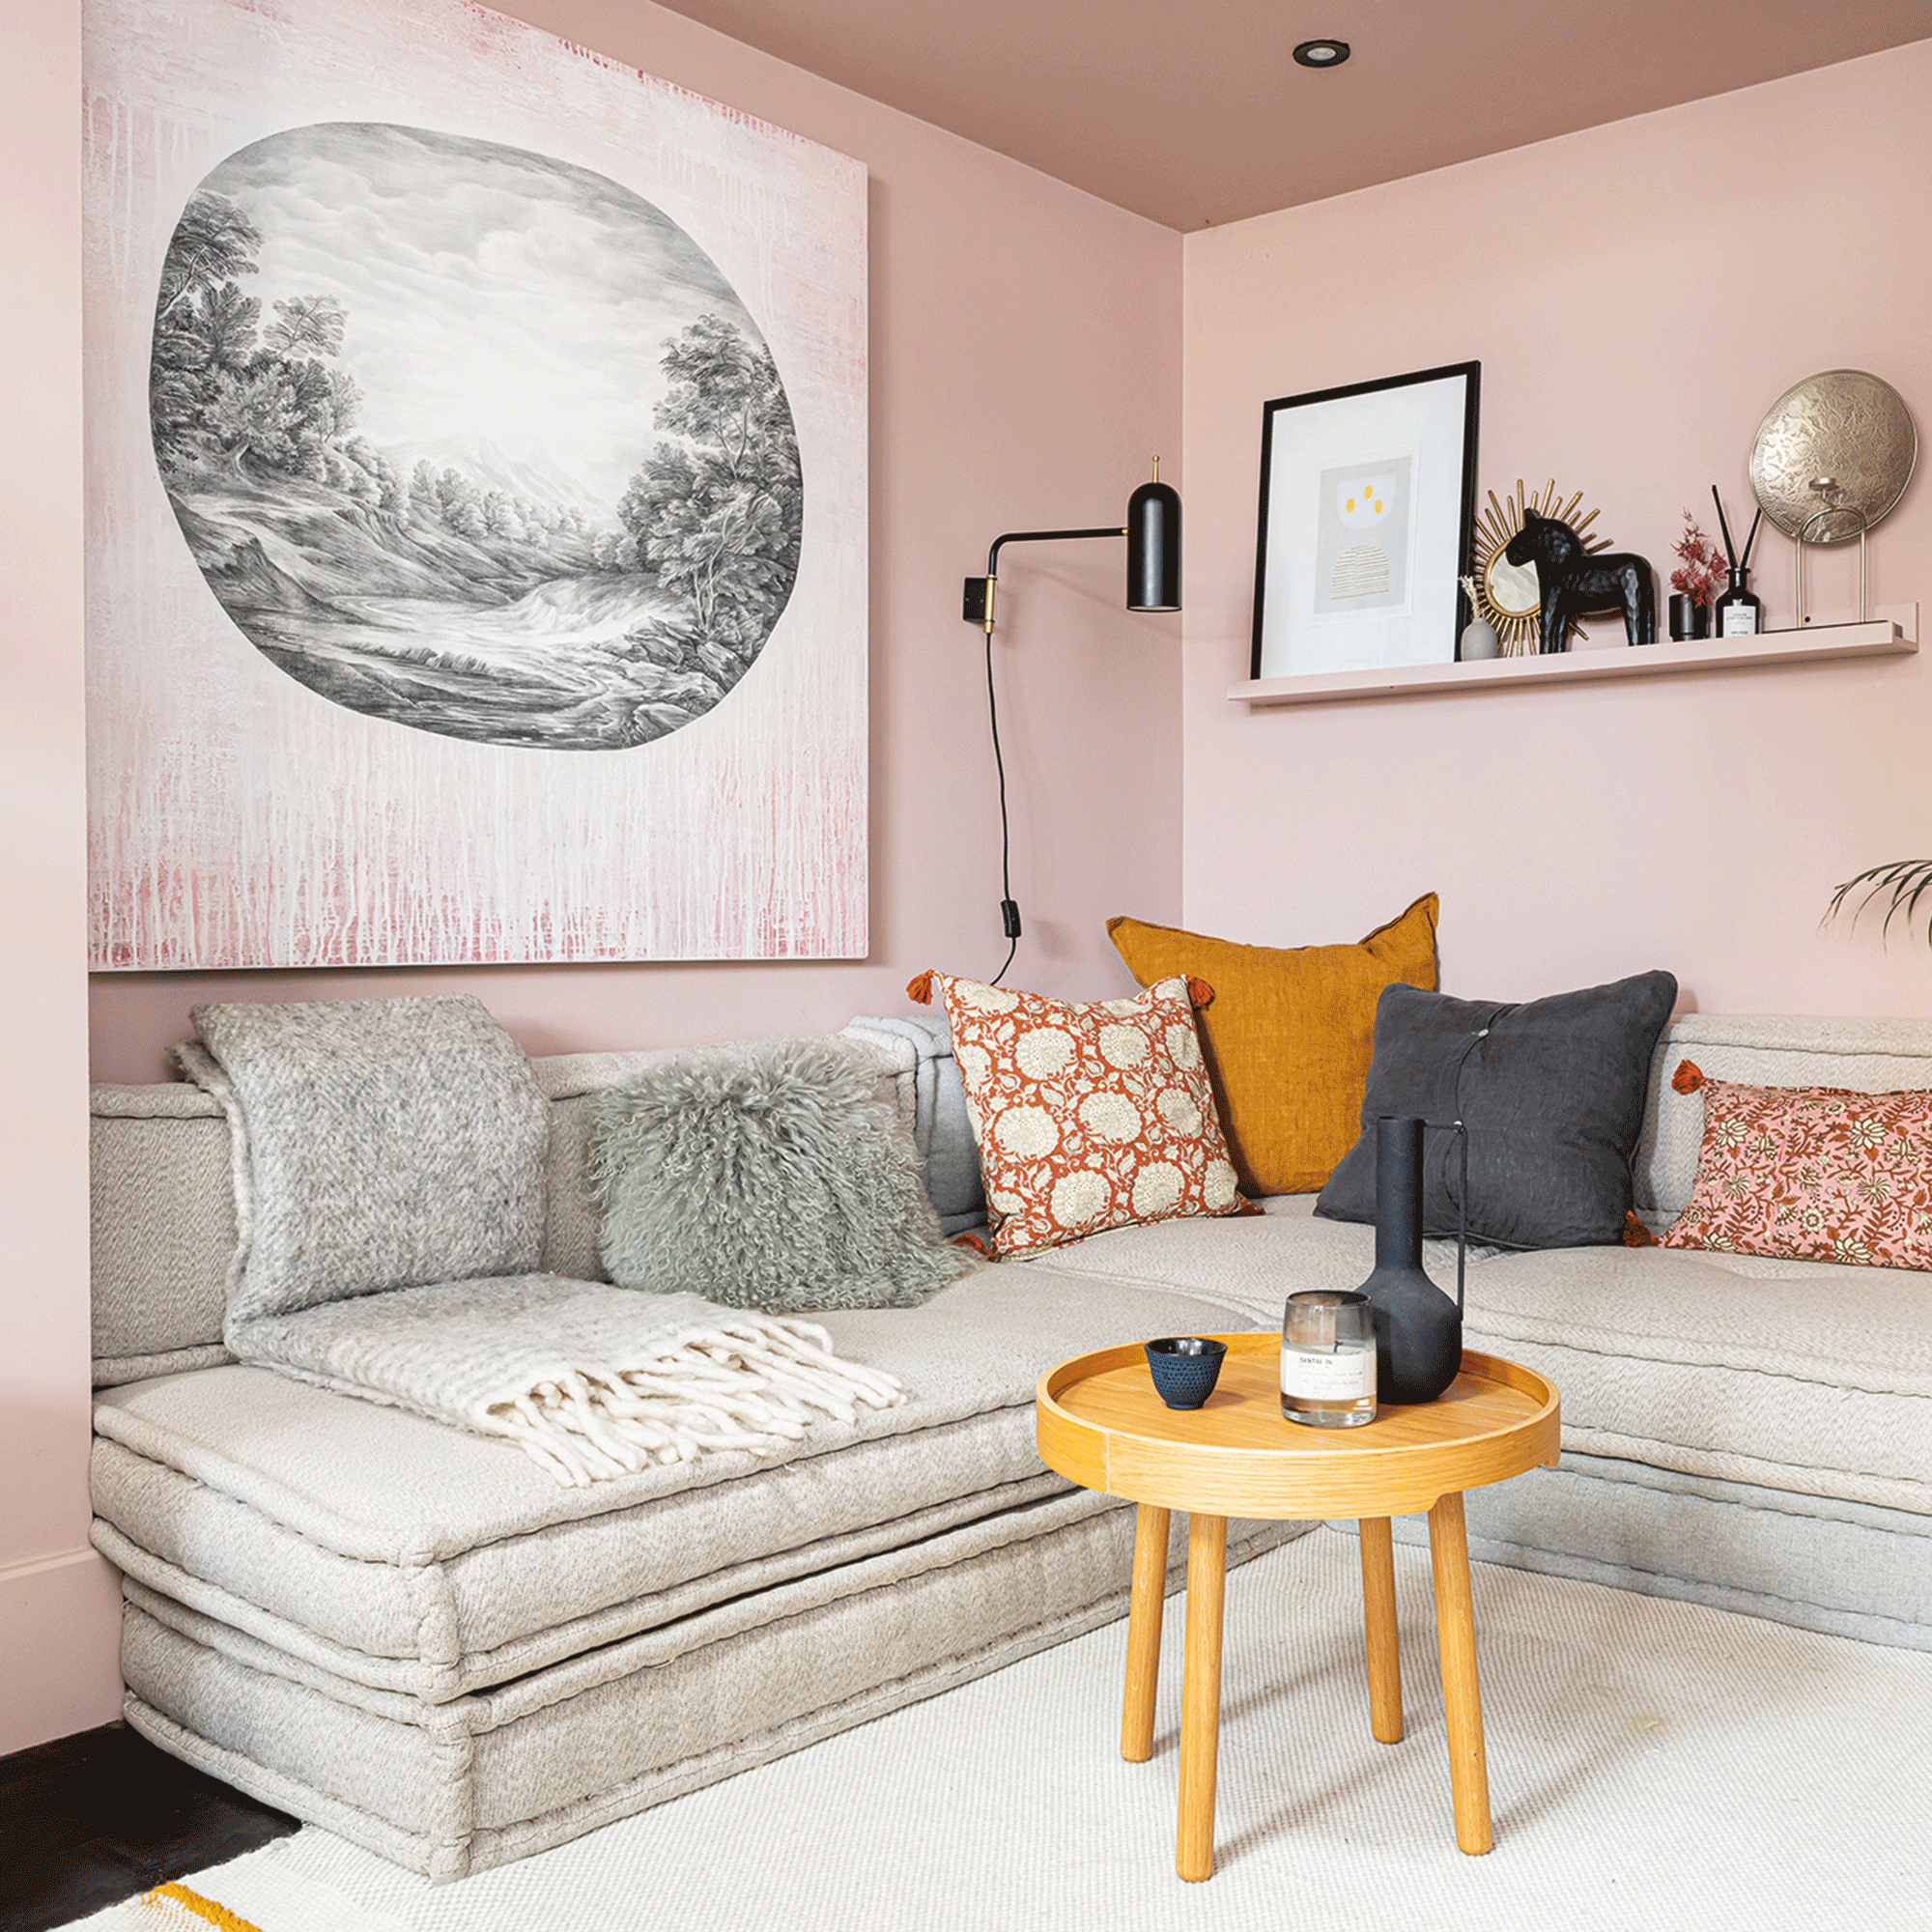 The best pink paint - the ultimate guide to choosing the ideal shade for your home